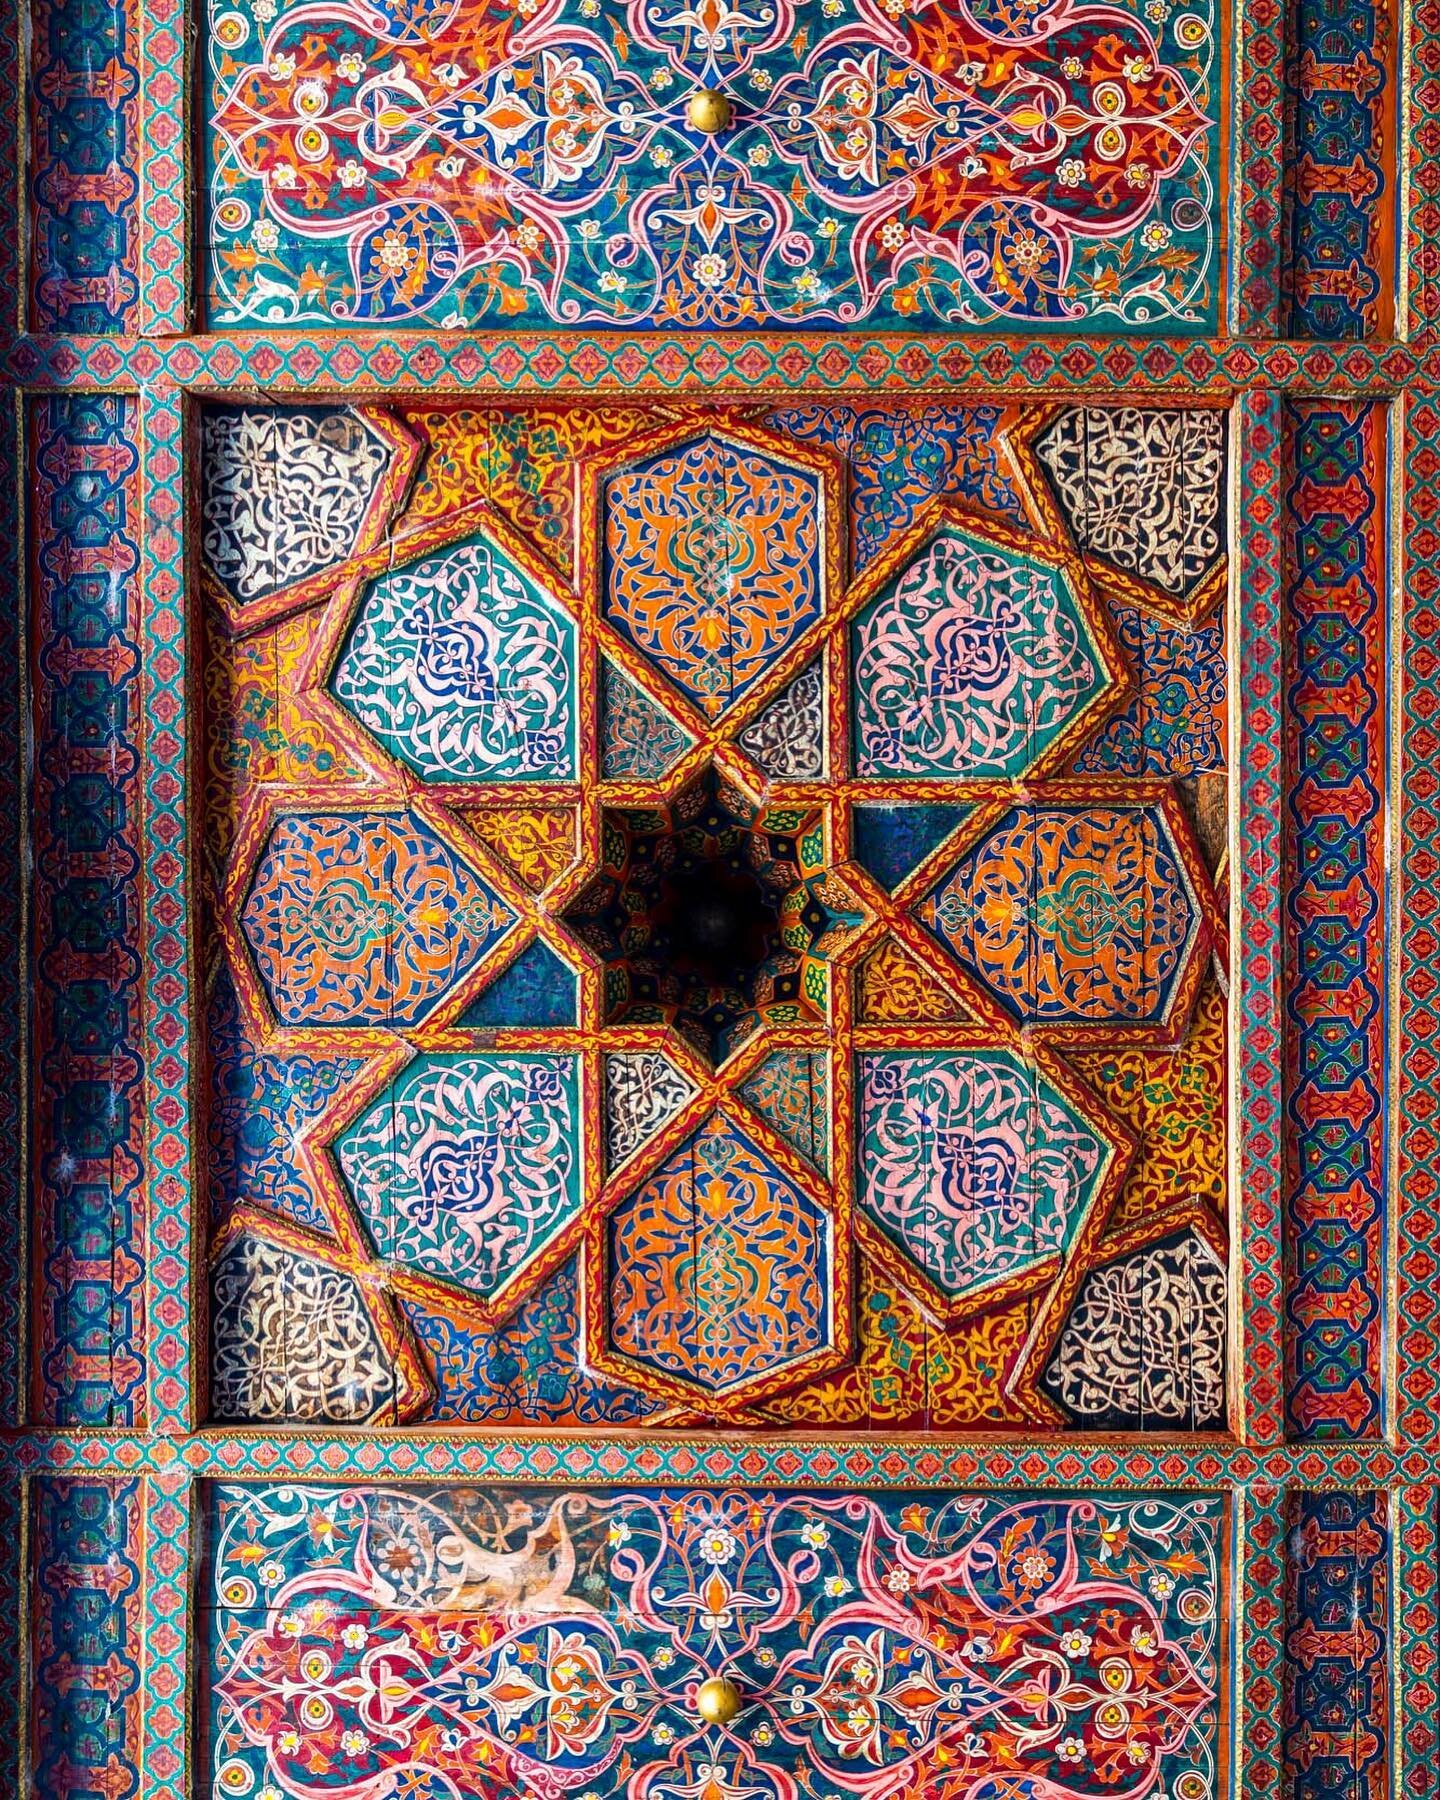 Ceiling details from Khiva&rsquo;s Tash Hauli Palace. This photo features in my new exhibition &lsquo;The Silk Road: A Living History&rsquo; in London&rsquo;s King&rsquo;s Cross. Presented by @akf_uk. 

Link in my bio for more info.
&mdash;&mdash;&md